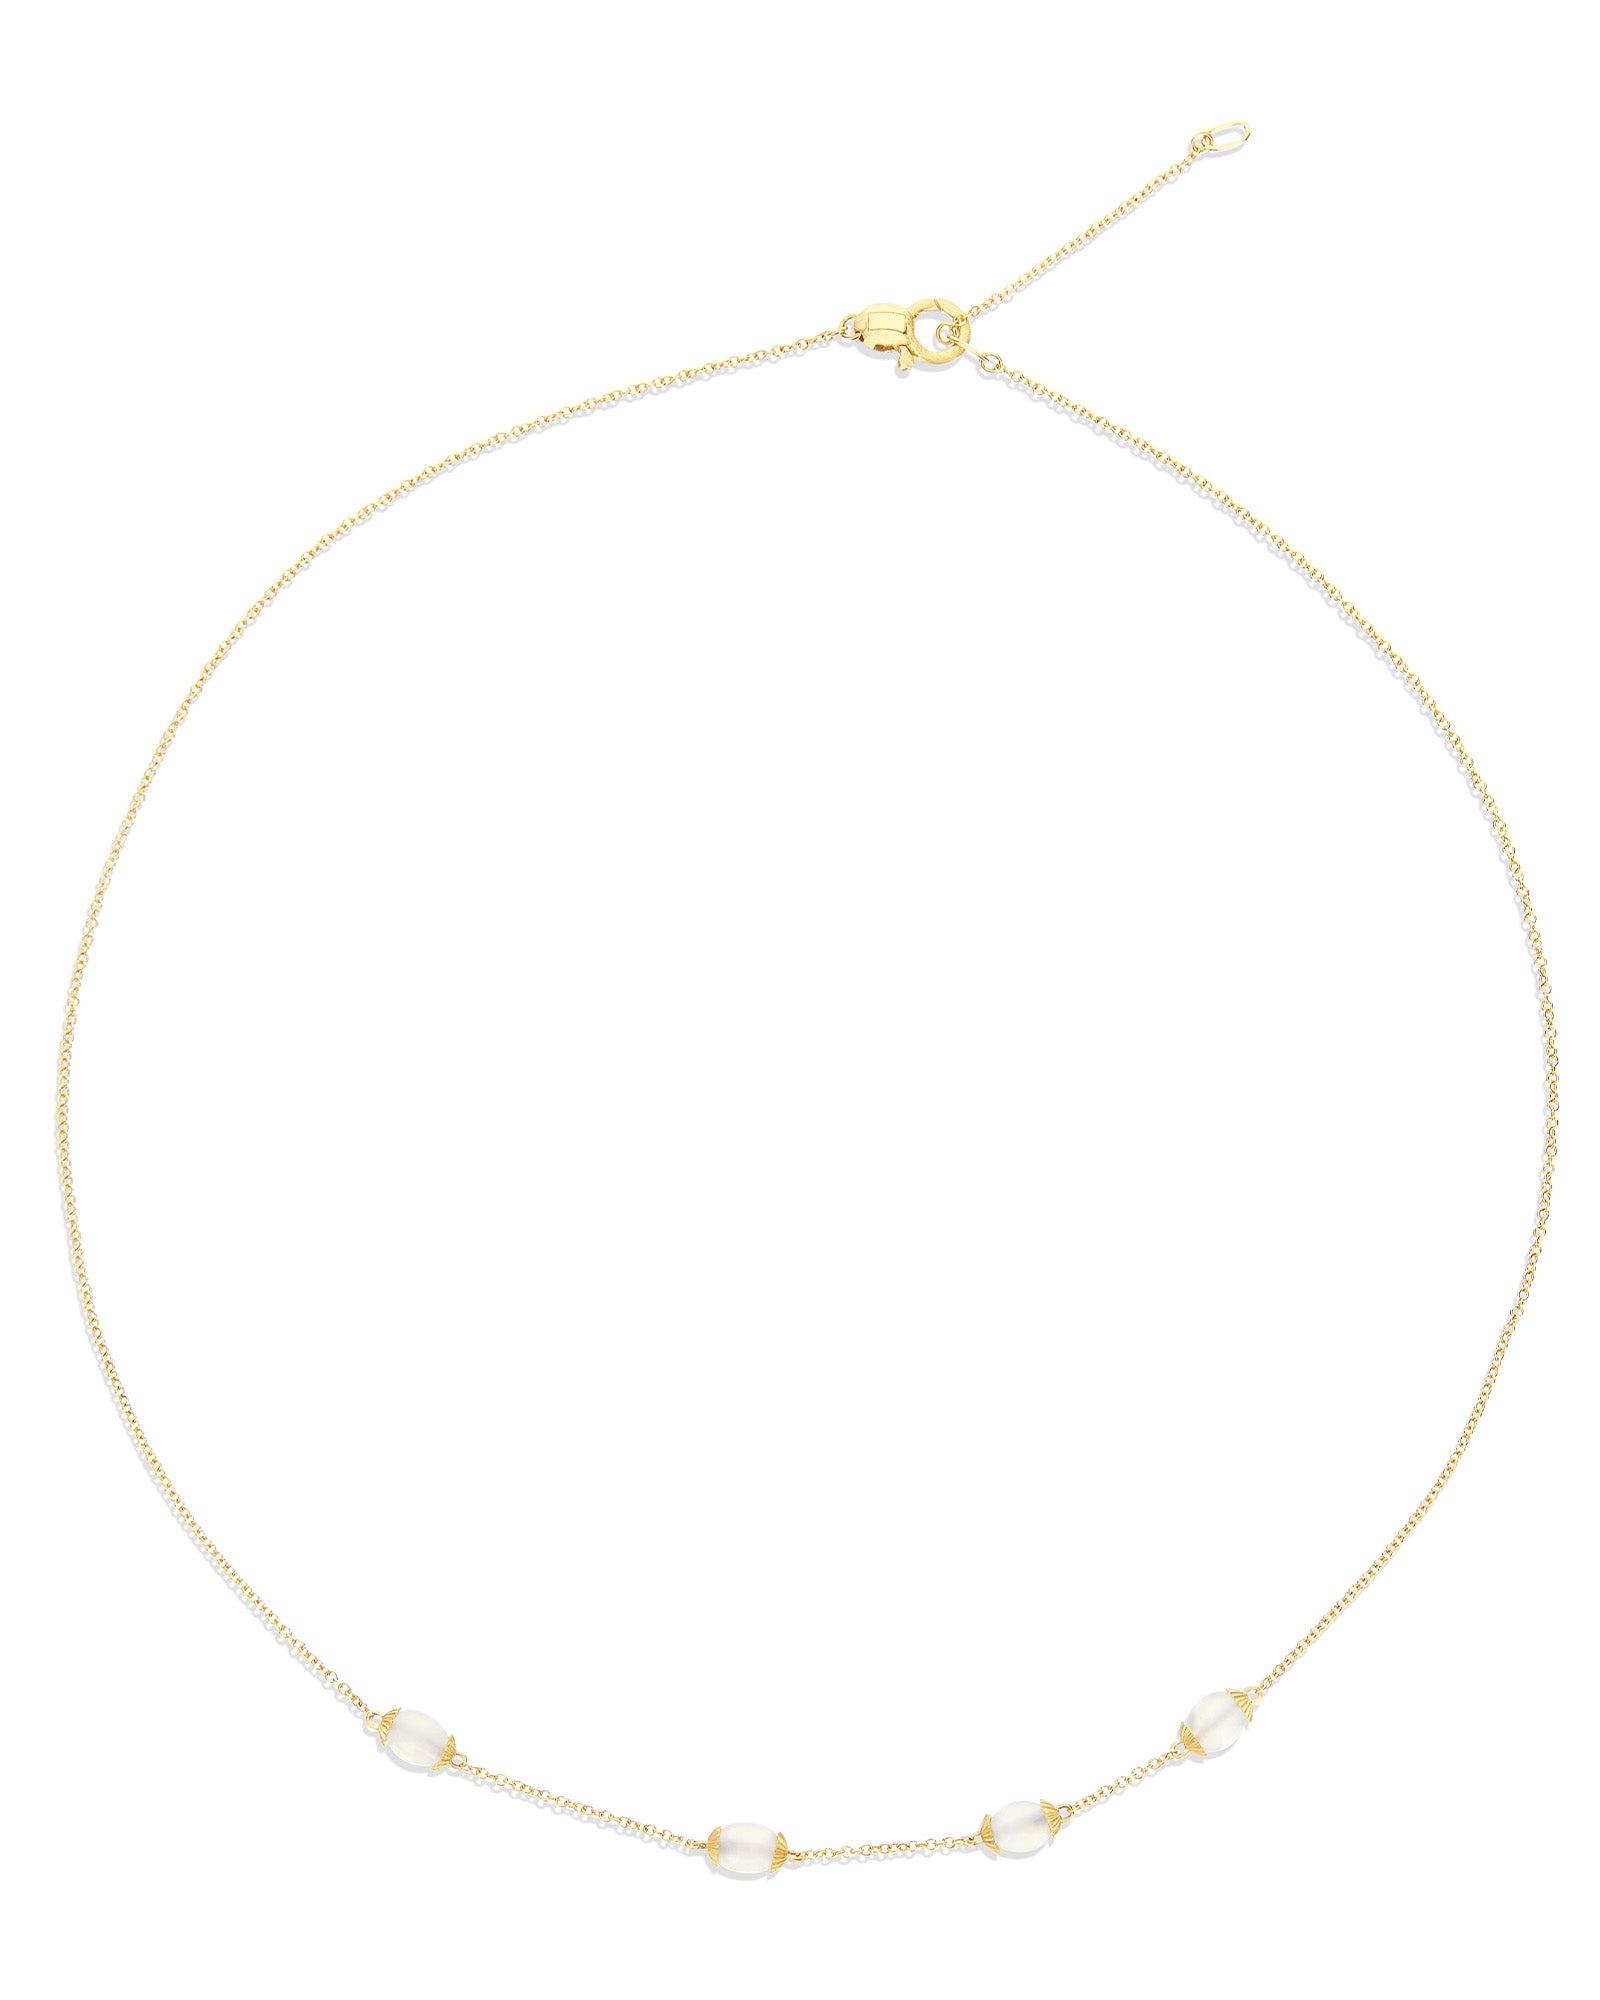 "white desert" gold and moonstone necklace